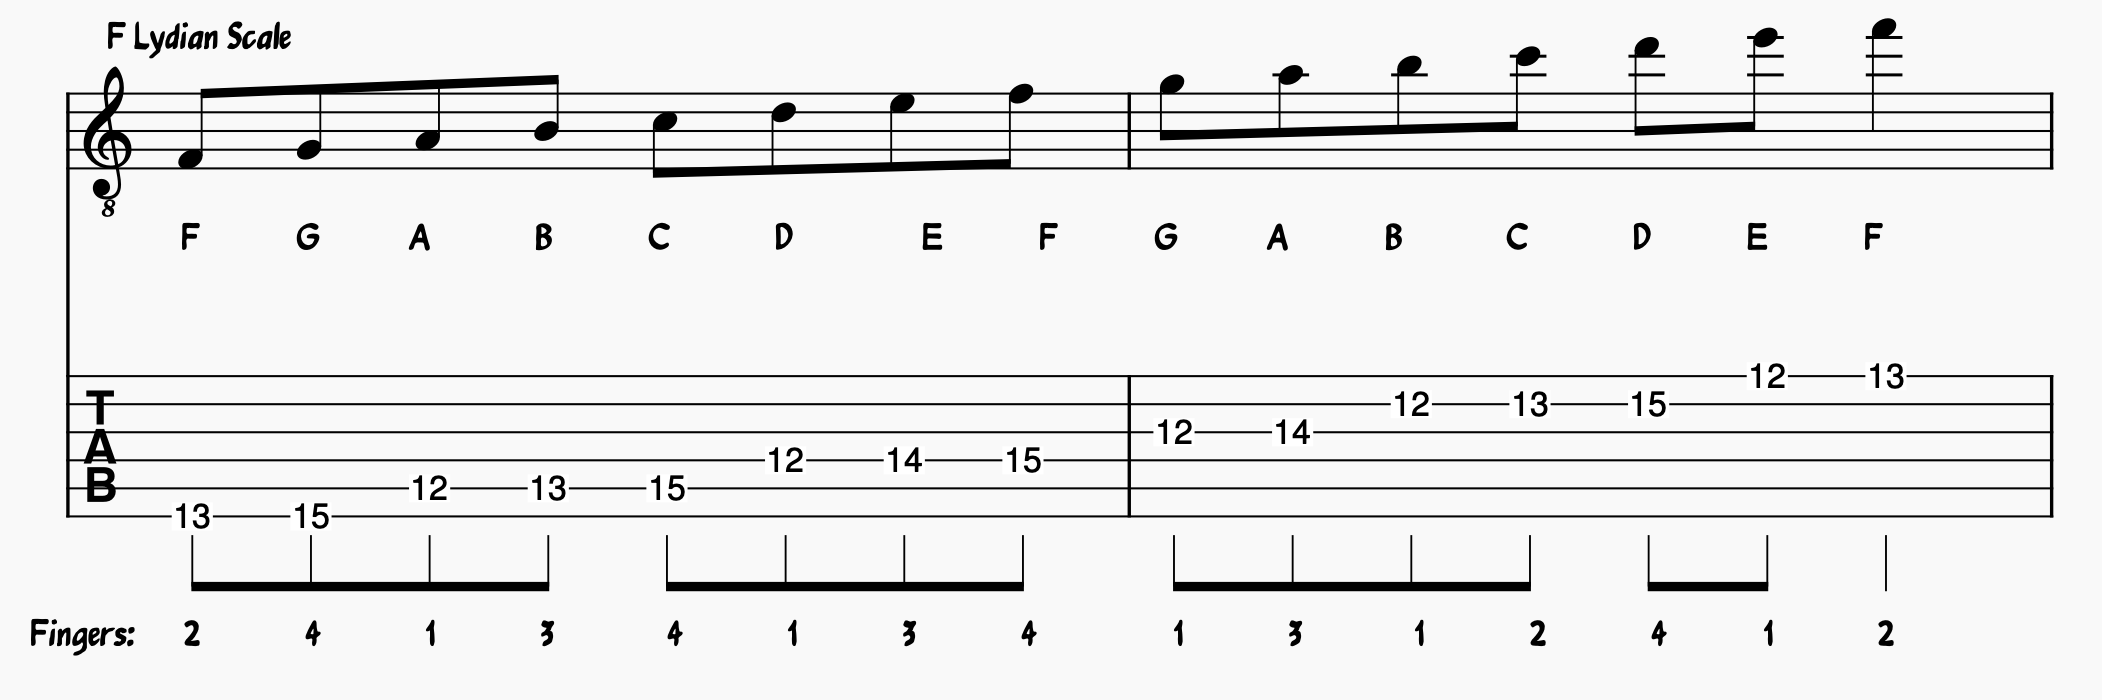 Jazz scales guitar: Lydian Scale on guitar; Lydian Mode